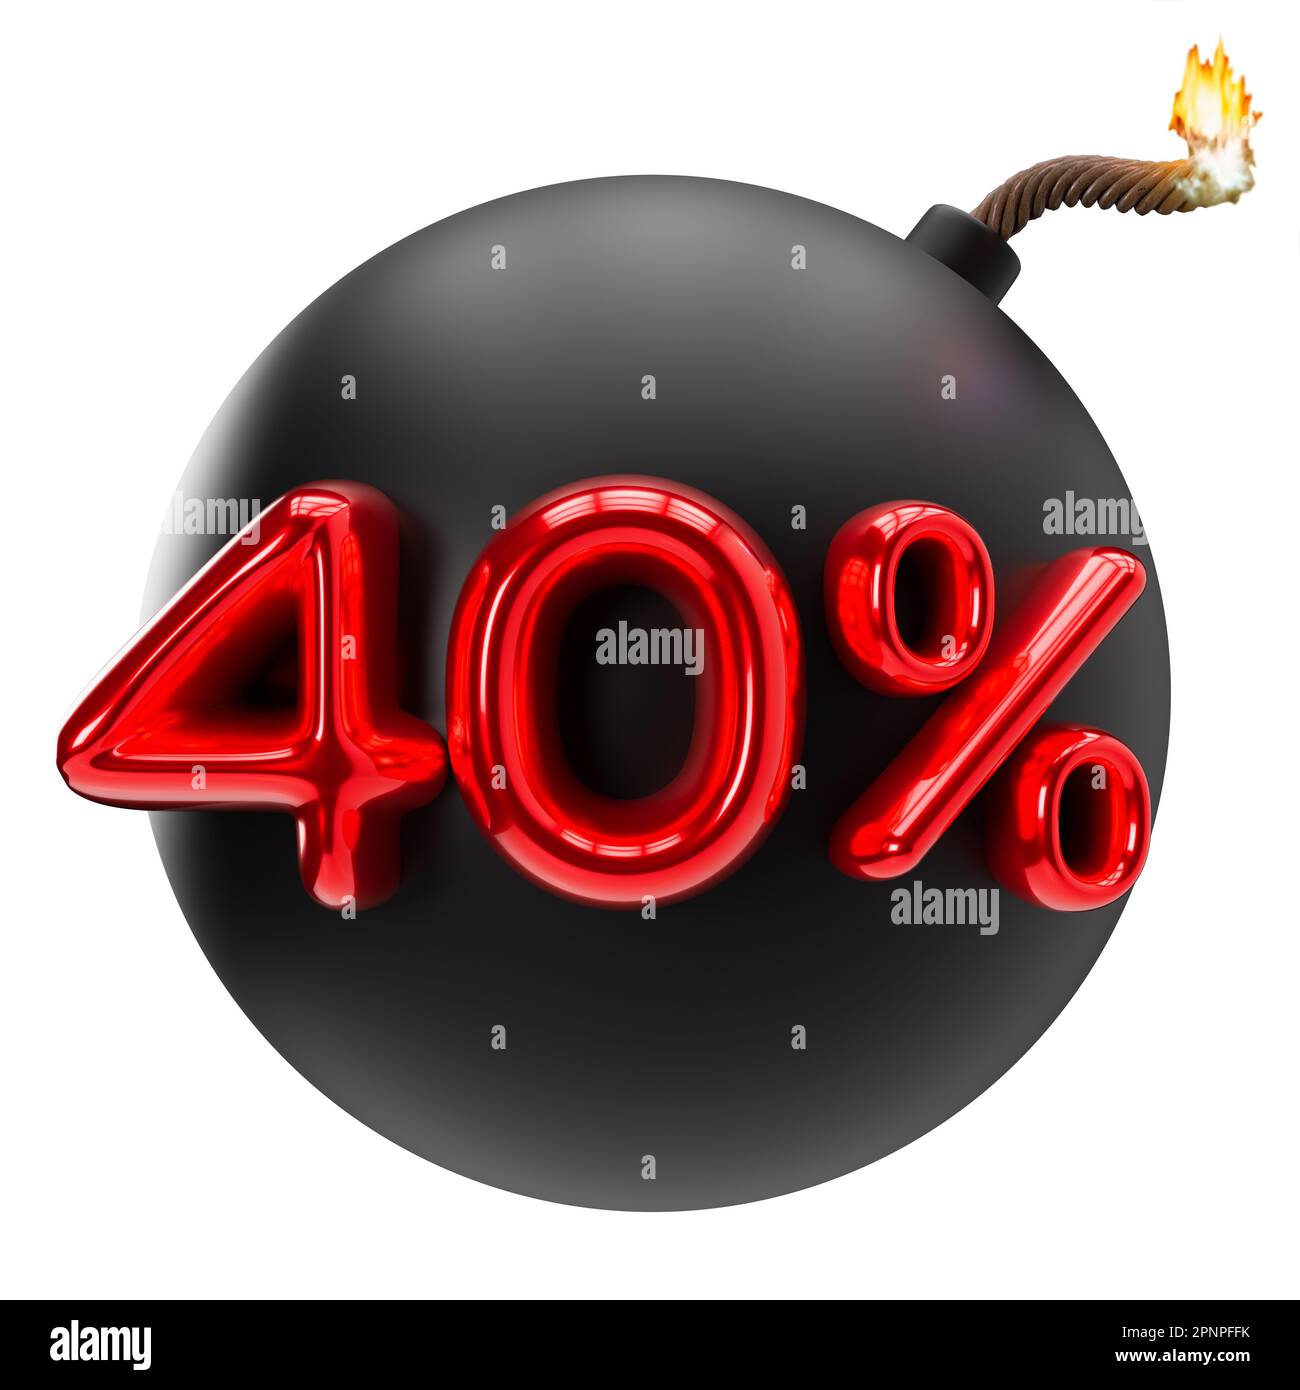 40 percent discount 3D illustration isolated on white background. Sale, special offer, good price, deal, shopping. Cut out red and black design Stock Photo